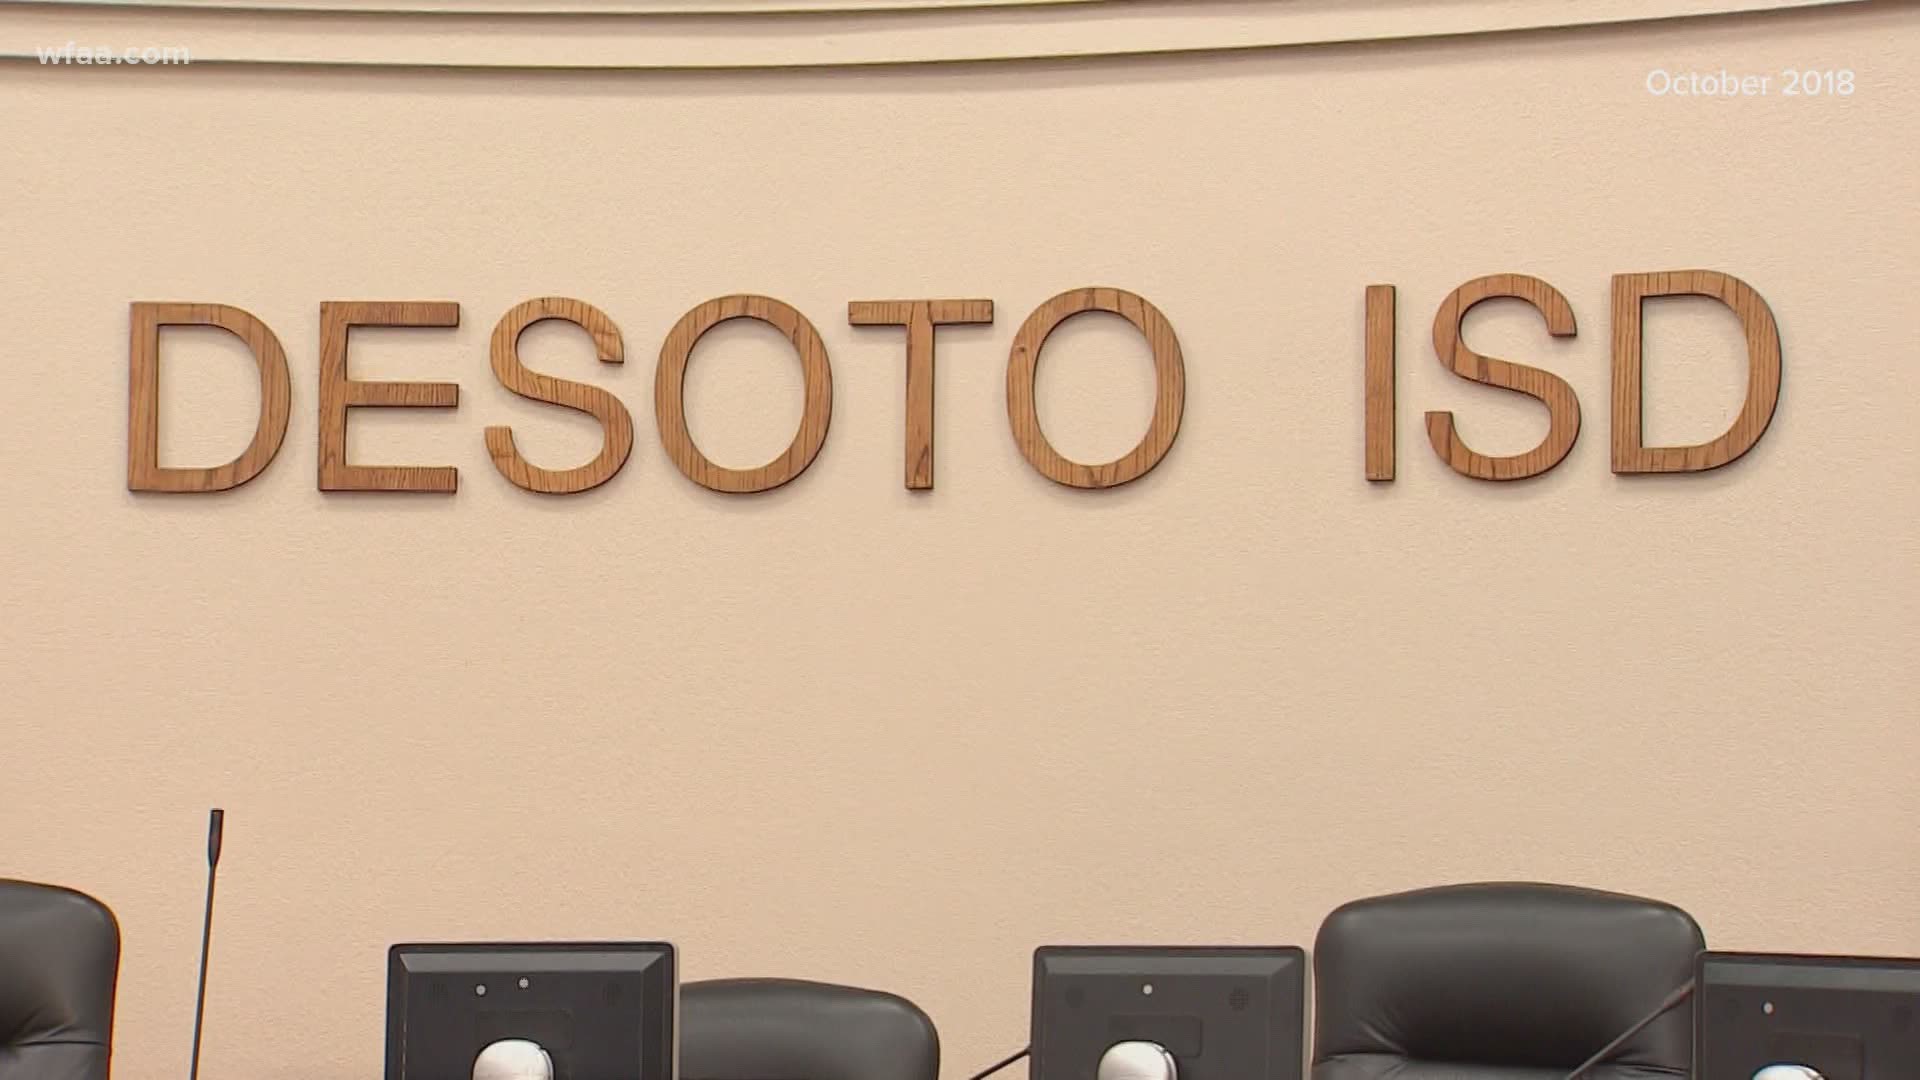 The DeSoto ISD board of trustees voted 4-3 in an emergency meeting Sunday to accept the voluntary resignation of superintendent D'Andre Weaver.